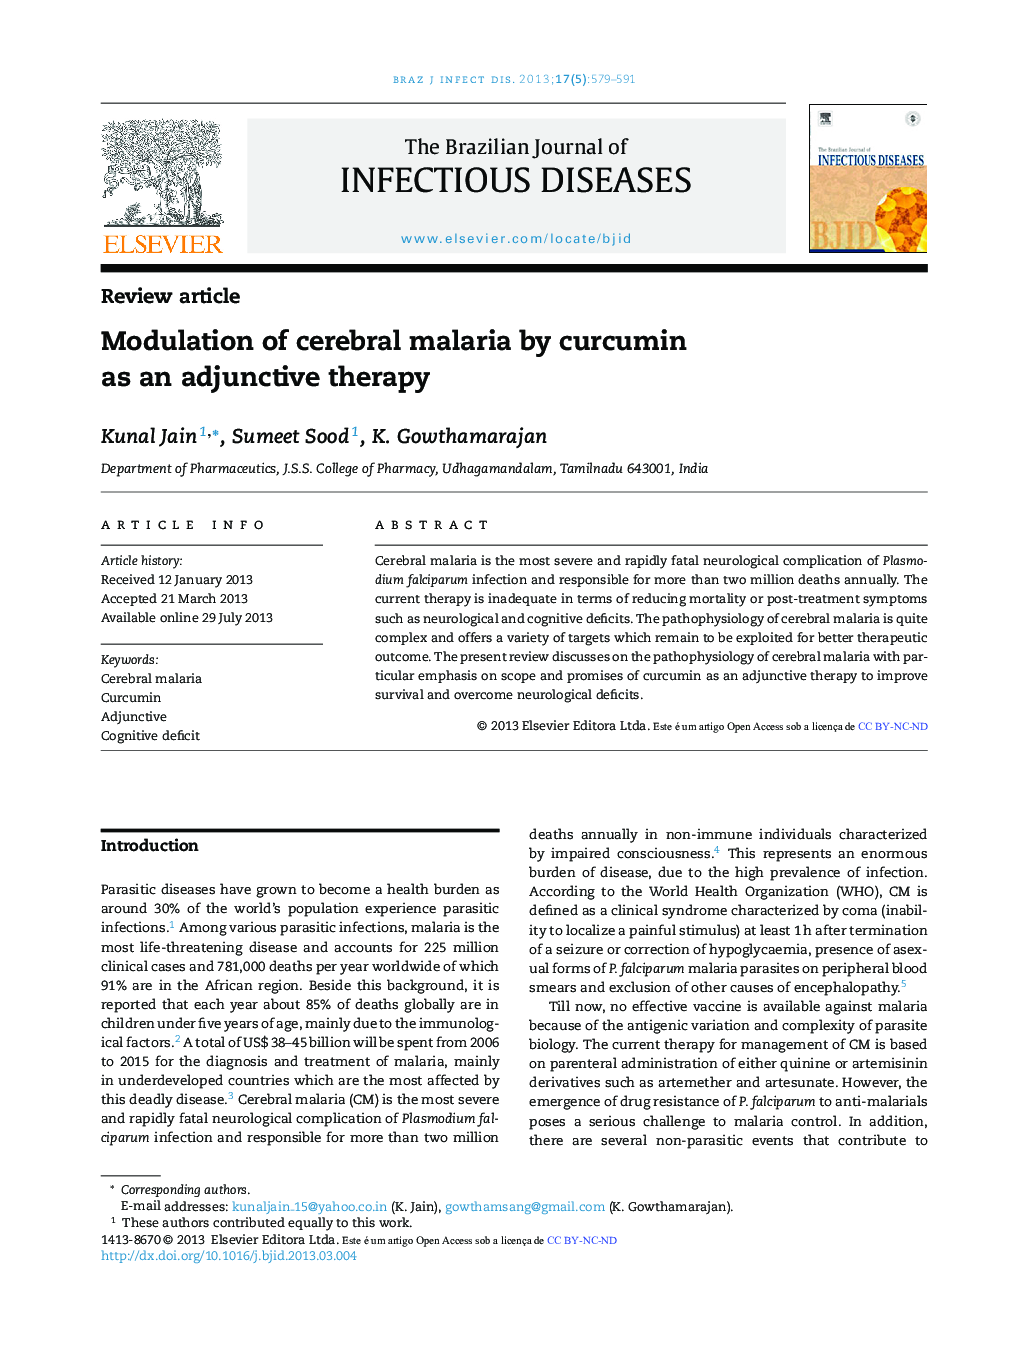 Modulation of cerebral malaria by curcumin as an adjunctive therapy